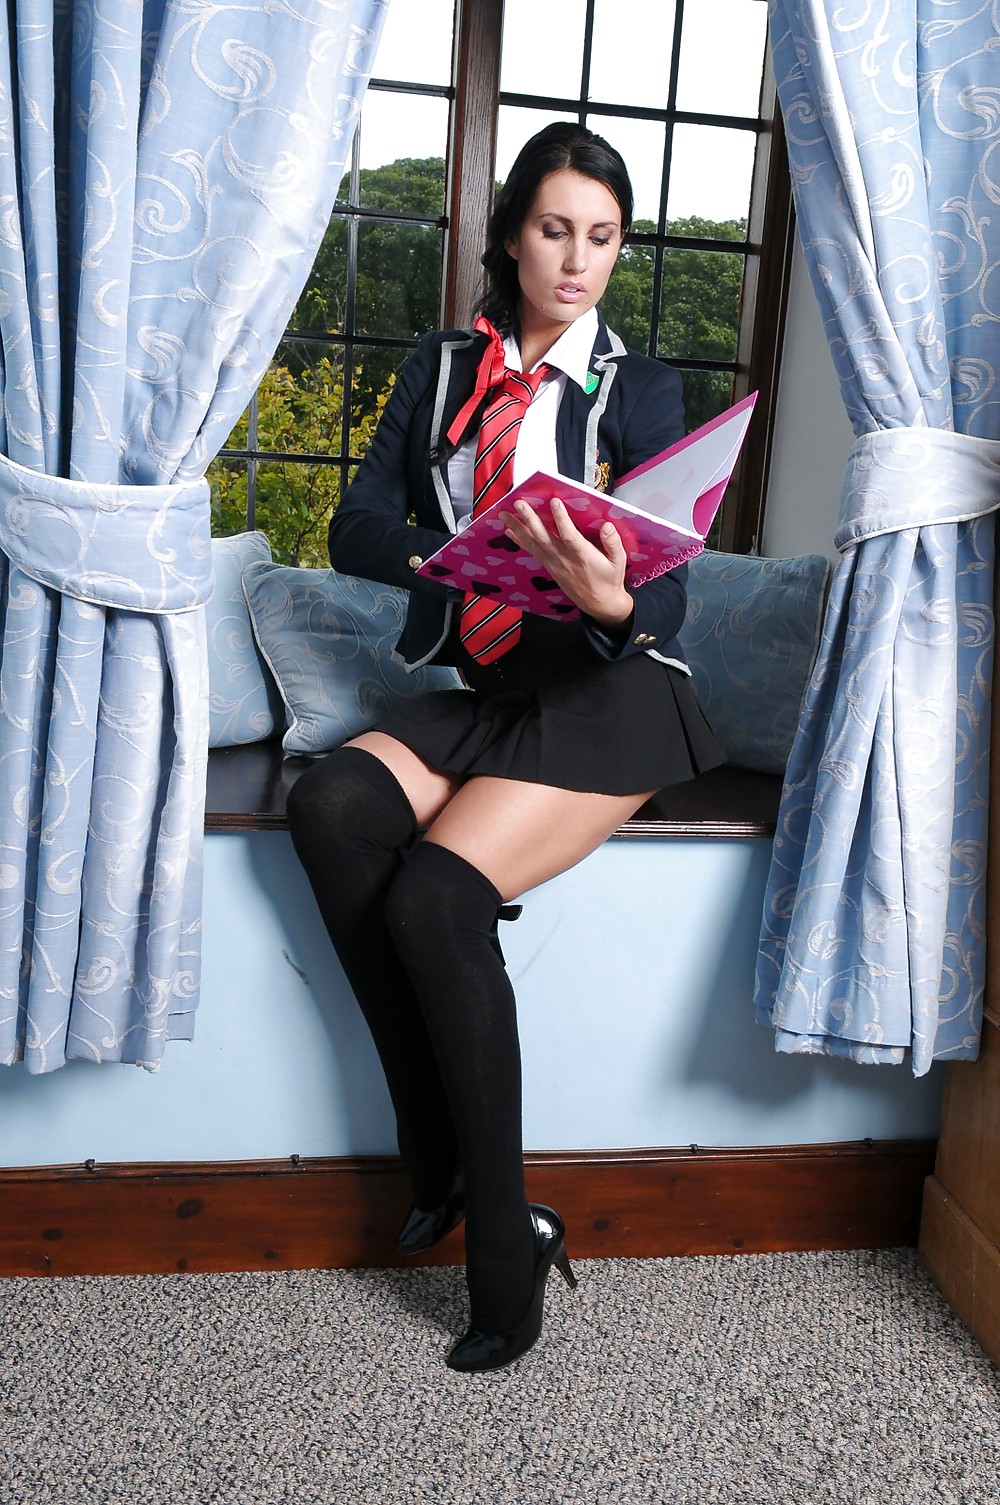 Schoolgirl Outfit Babes adult photos